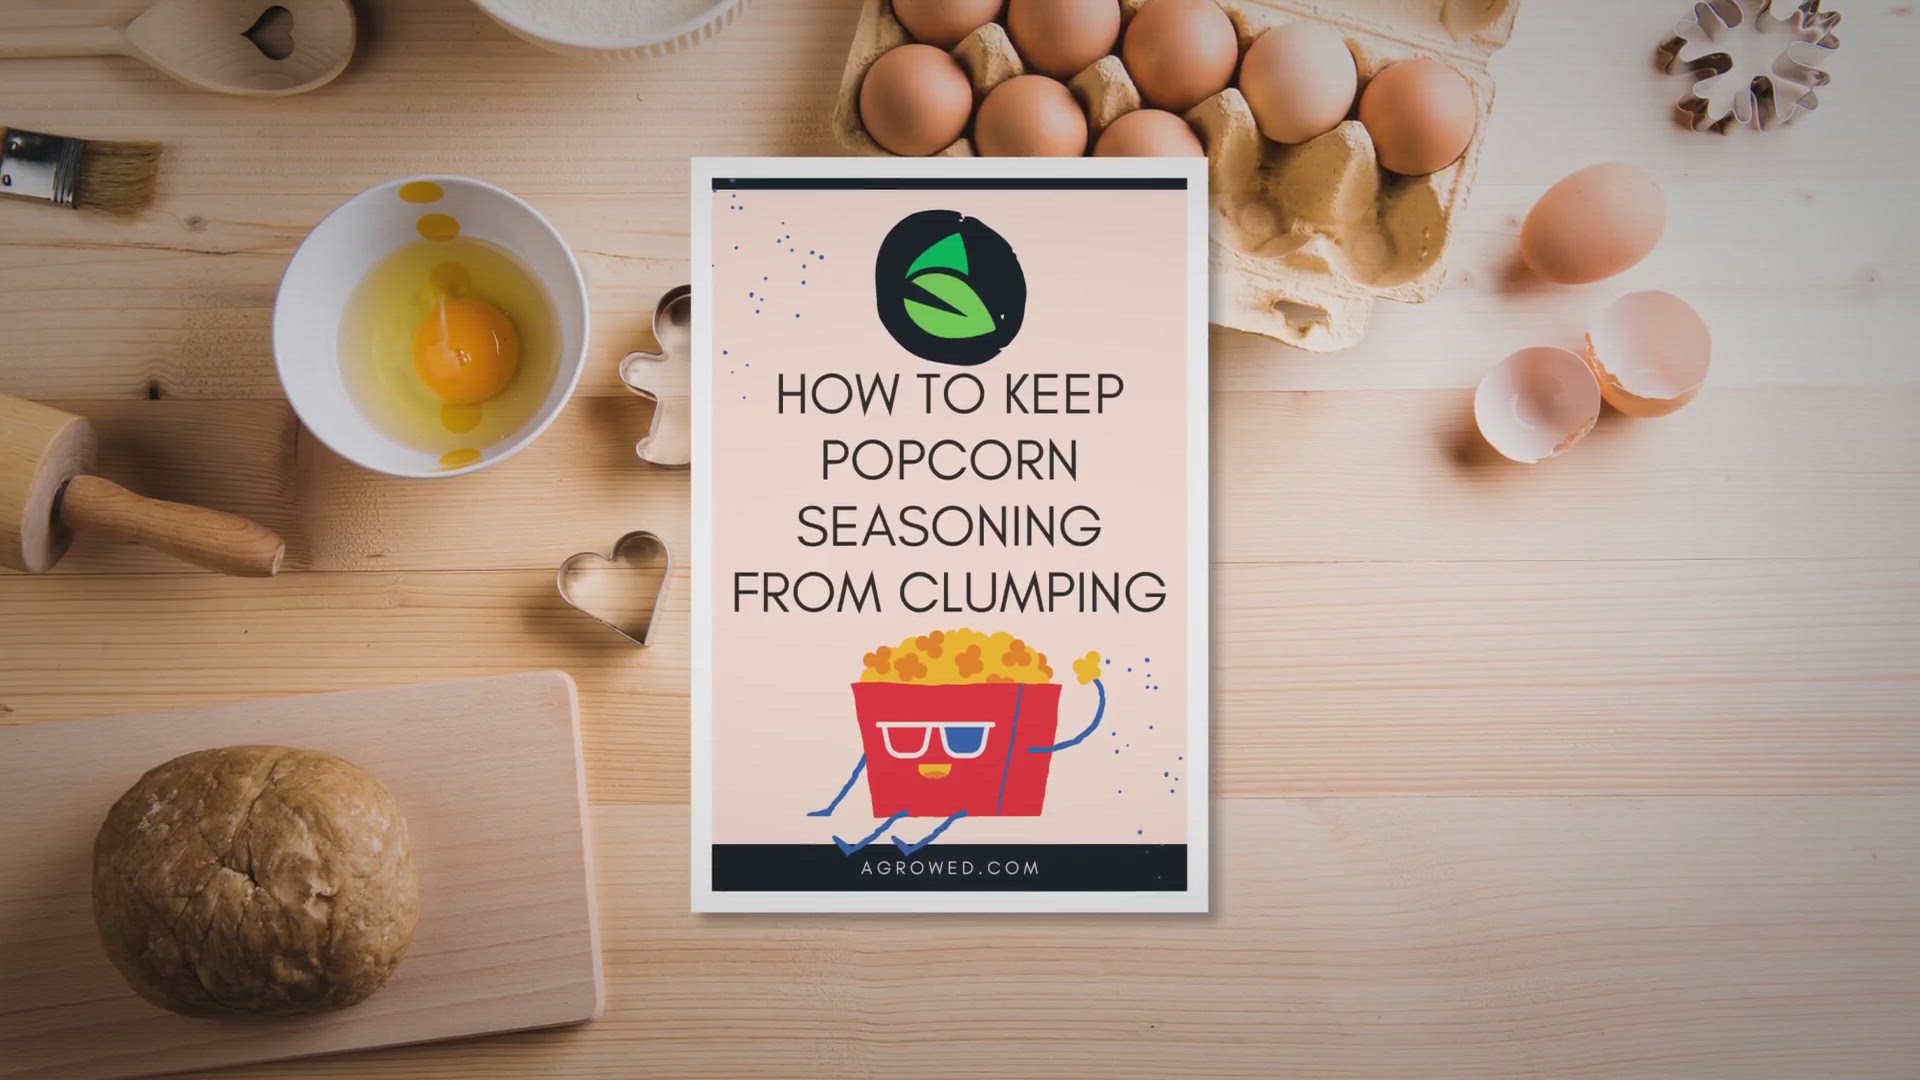 'Video thumbnail for How to Keep Popcorn Seasoning From Clumping'